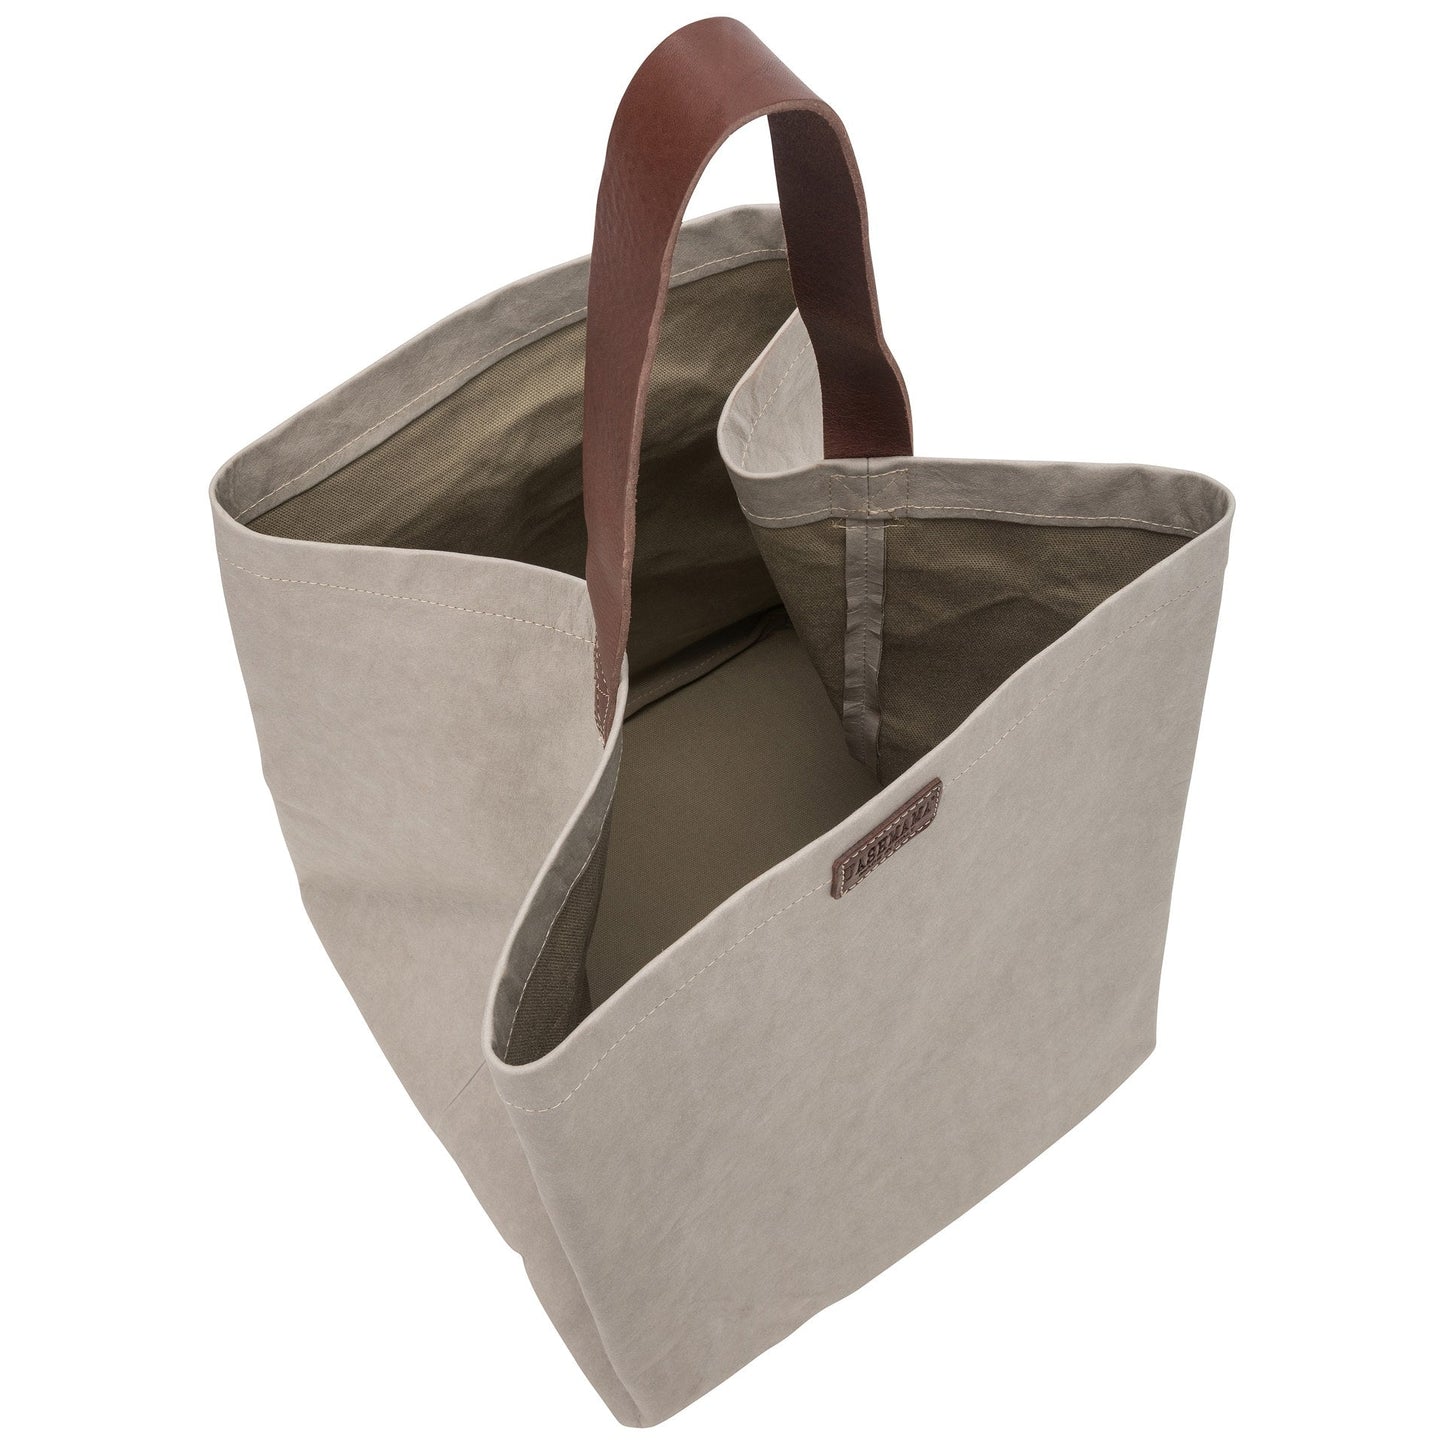 A grey washable paper handbag is shown open from the top angle.